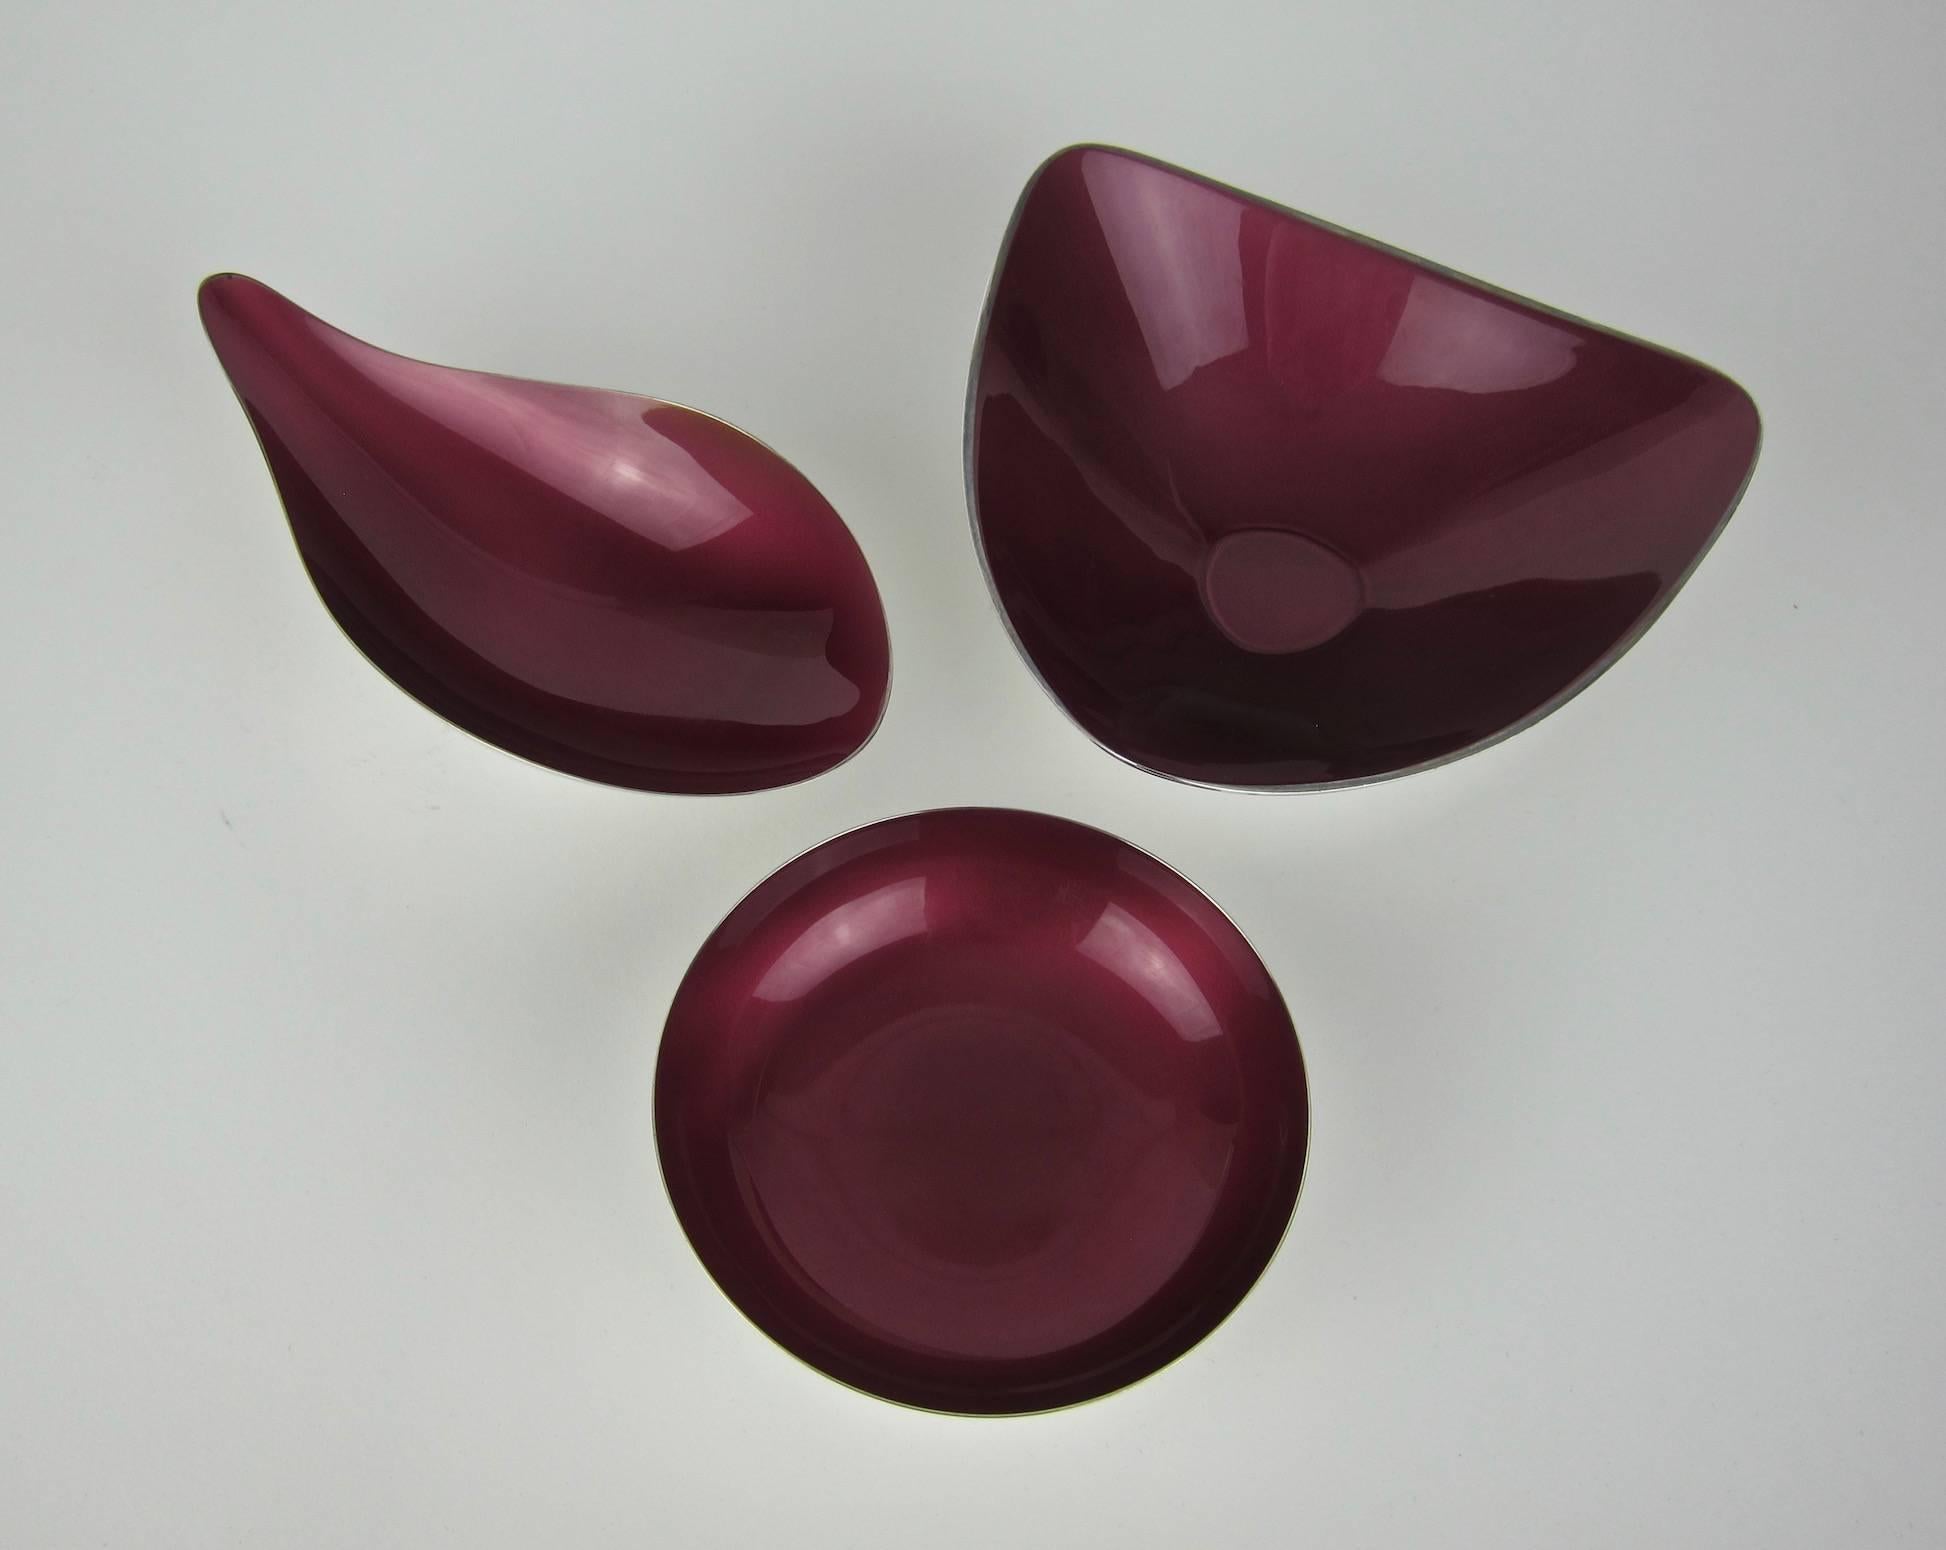 American Mid-Century Reed & Barton Silverplate Bowl Set with Ruby Red Color Glaze